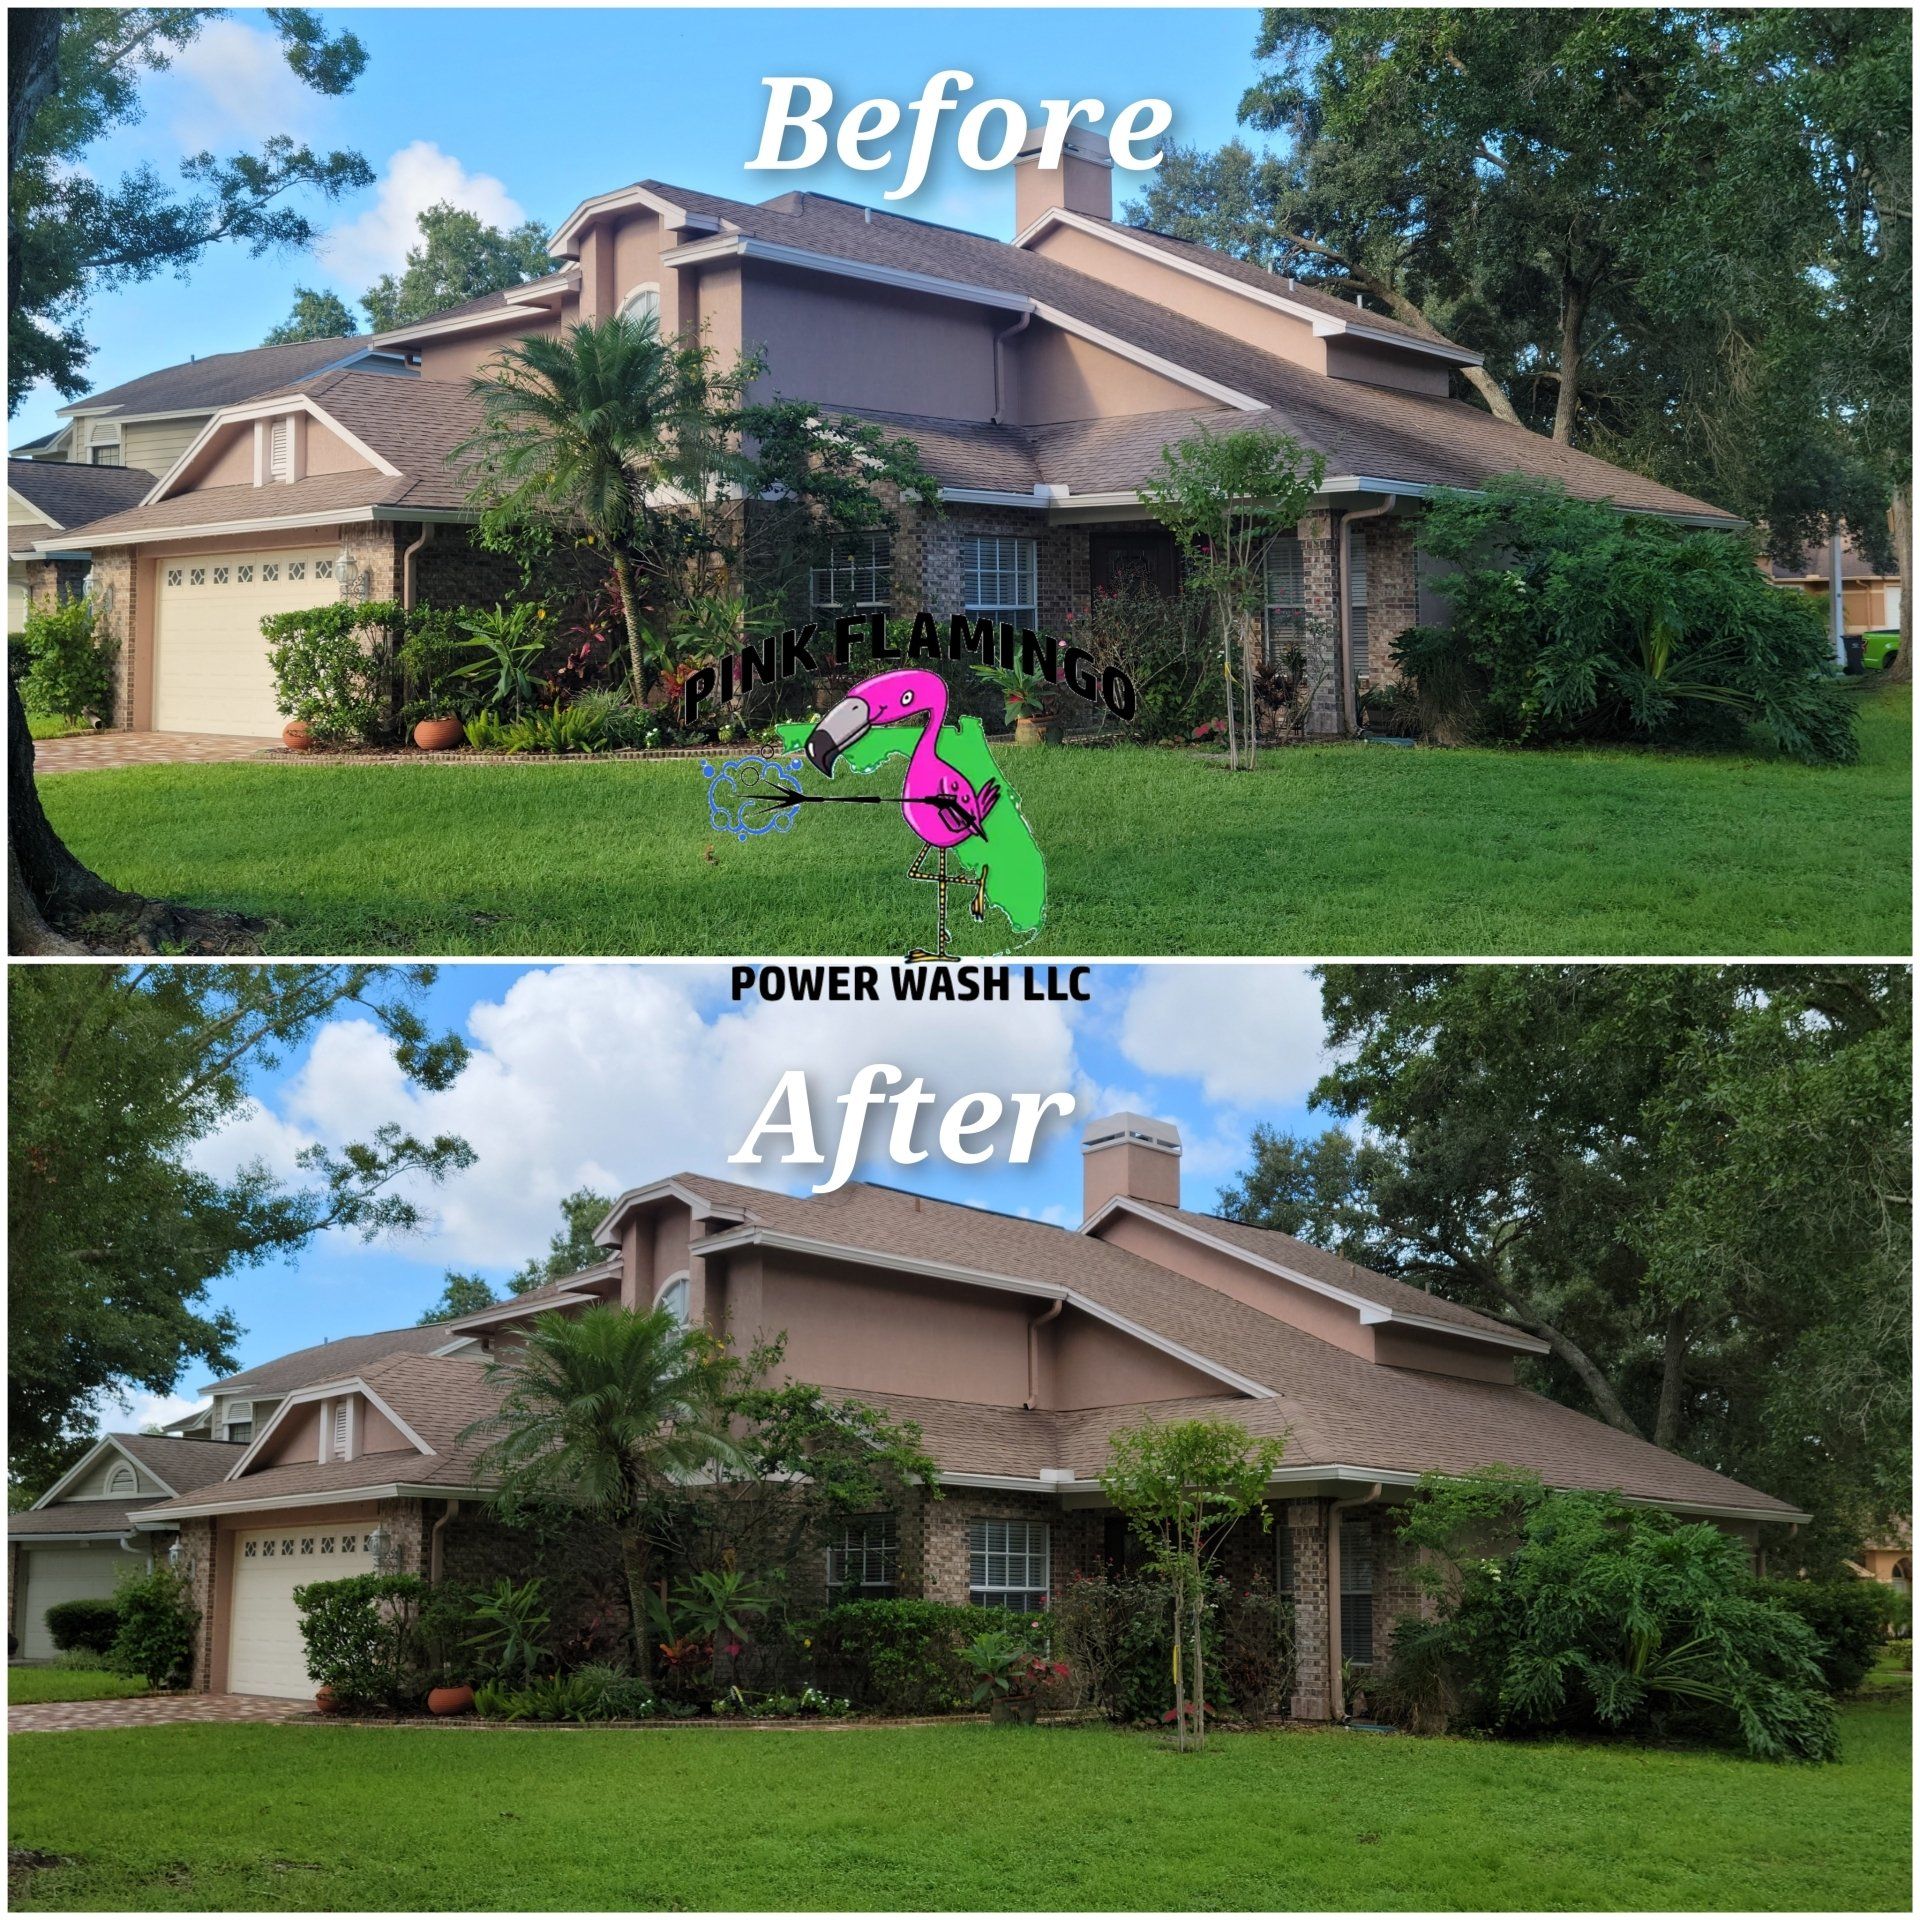 Low Pressure Roof Cleaning | Tampa, FL | Pink Flamingo Power Wash